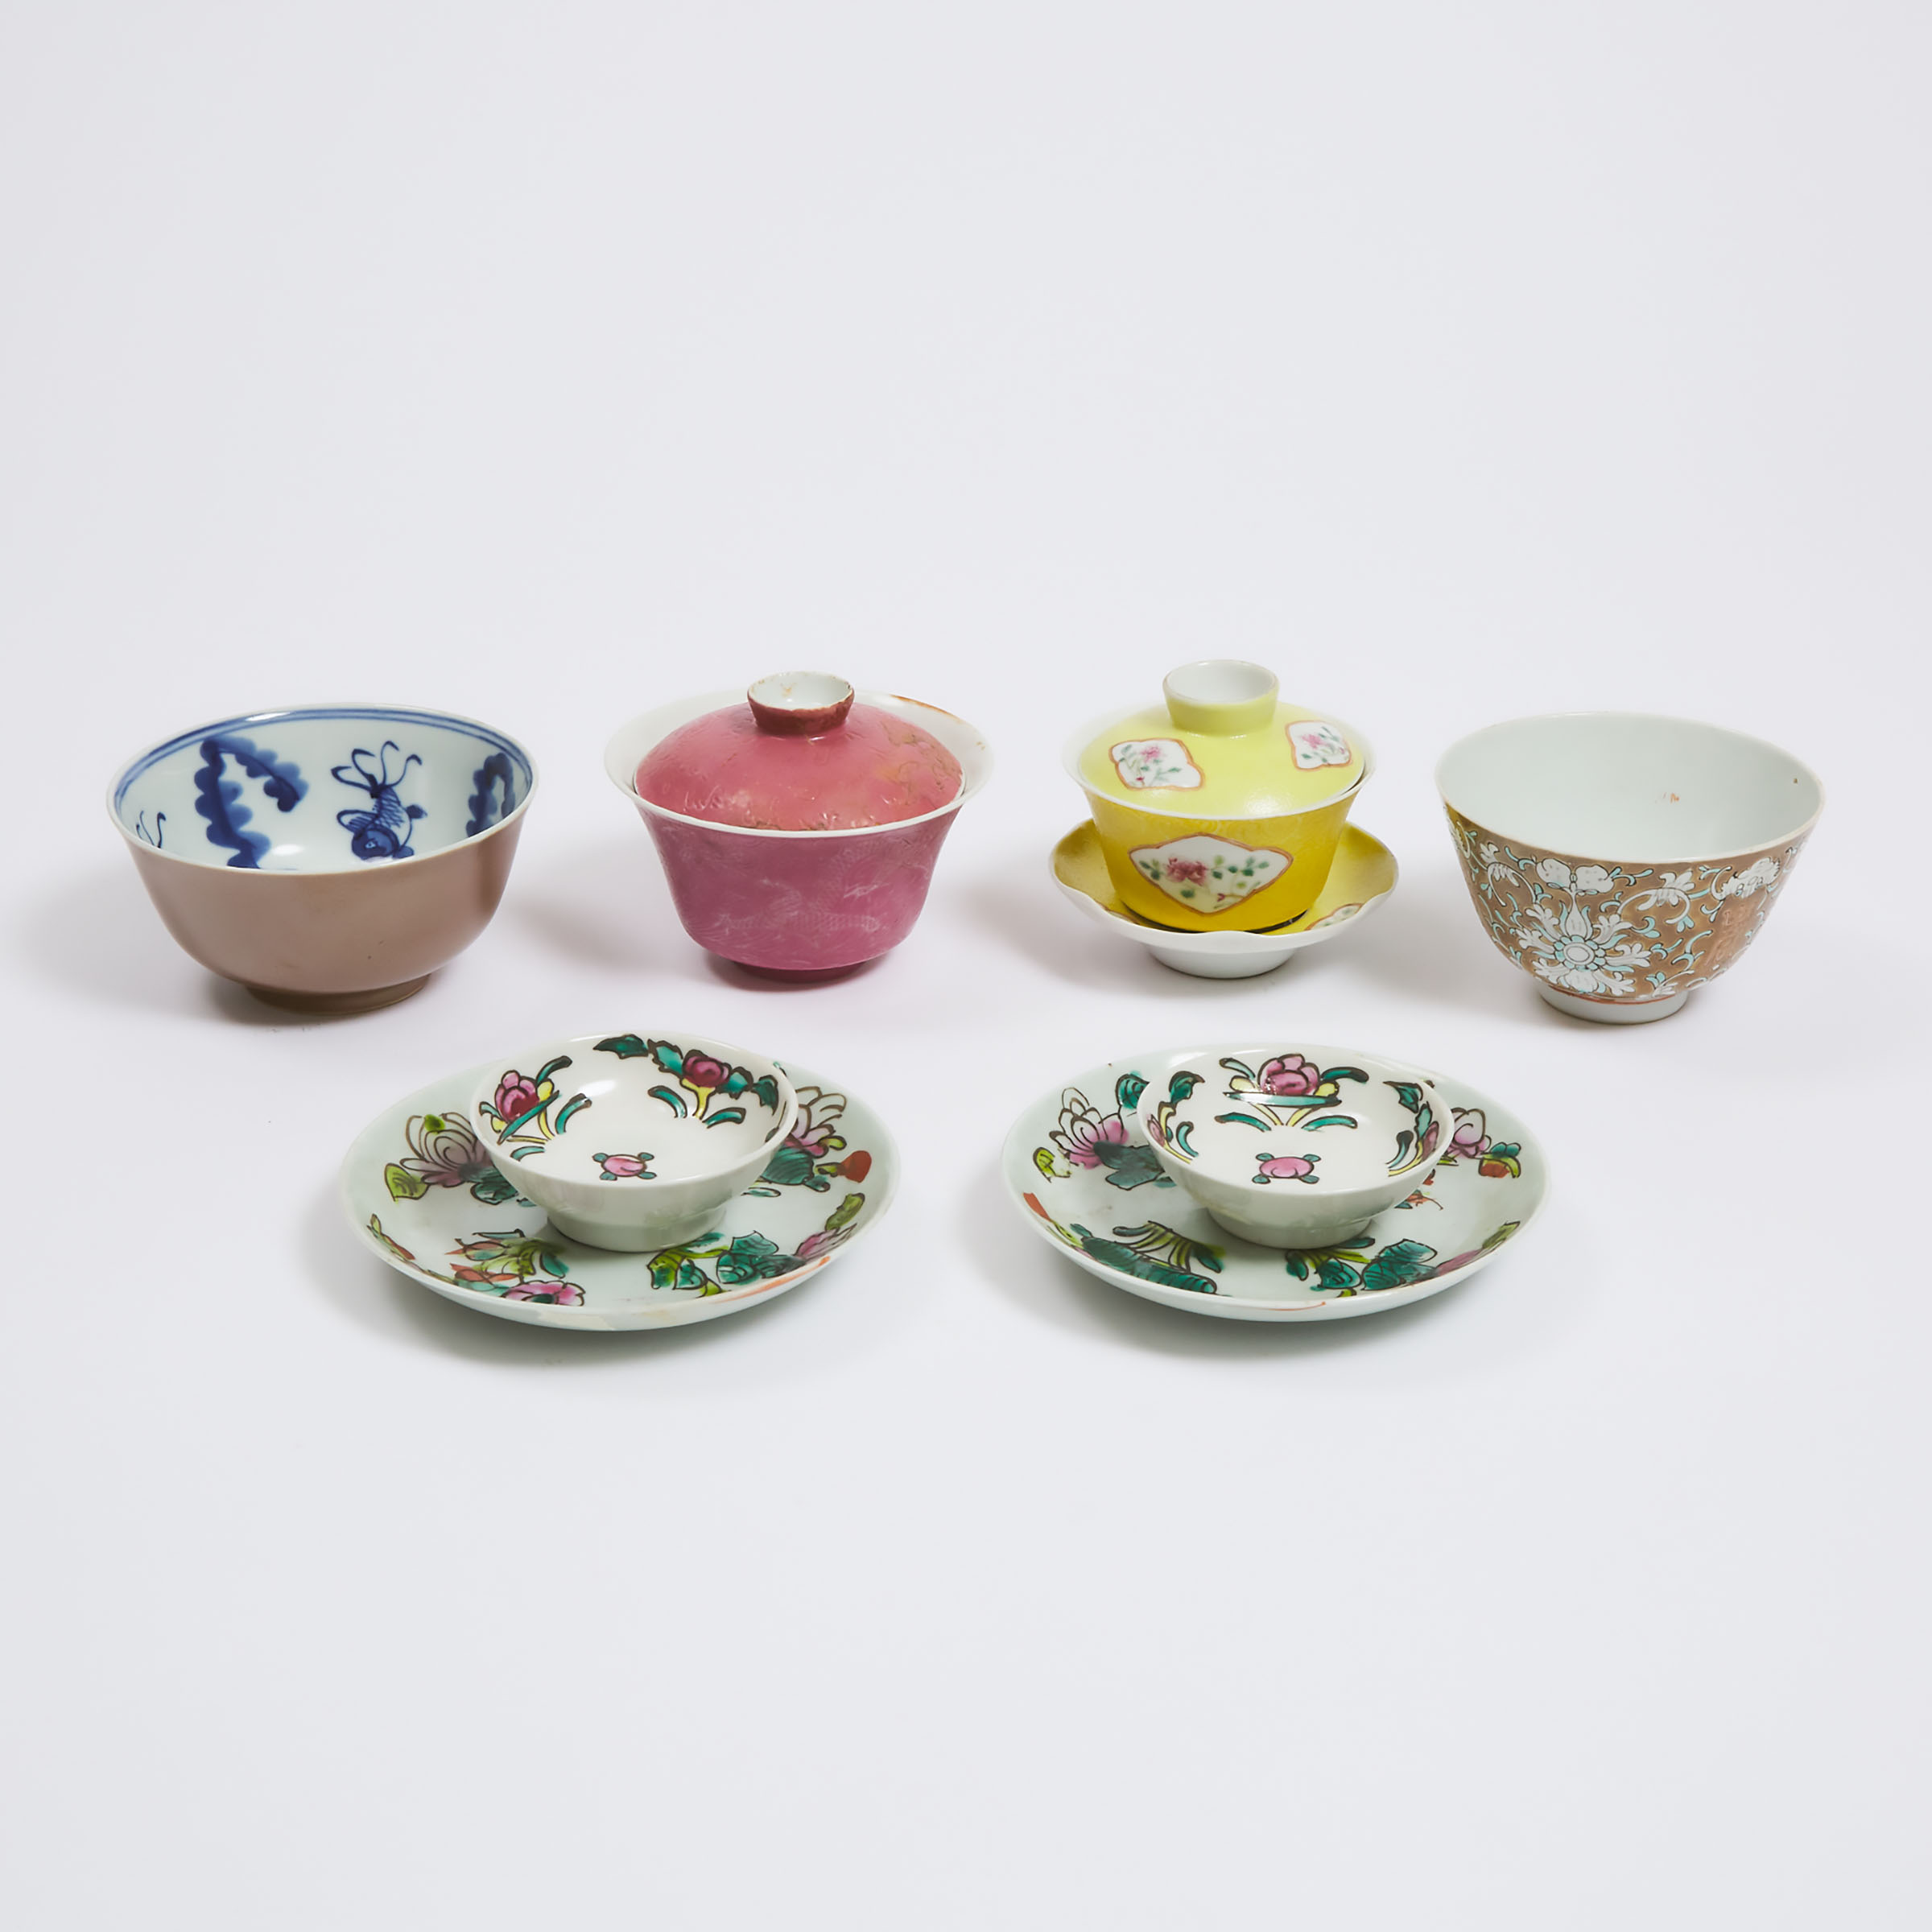 A Group of Eight Porcelain Wares, Republican Period